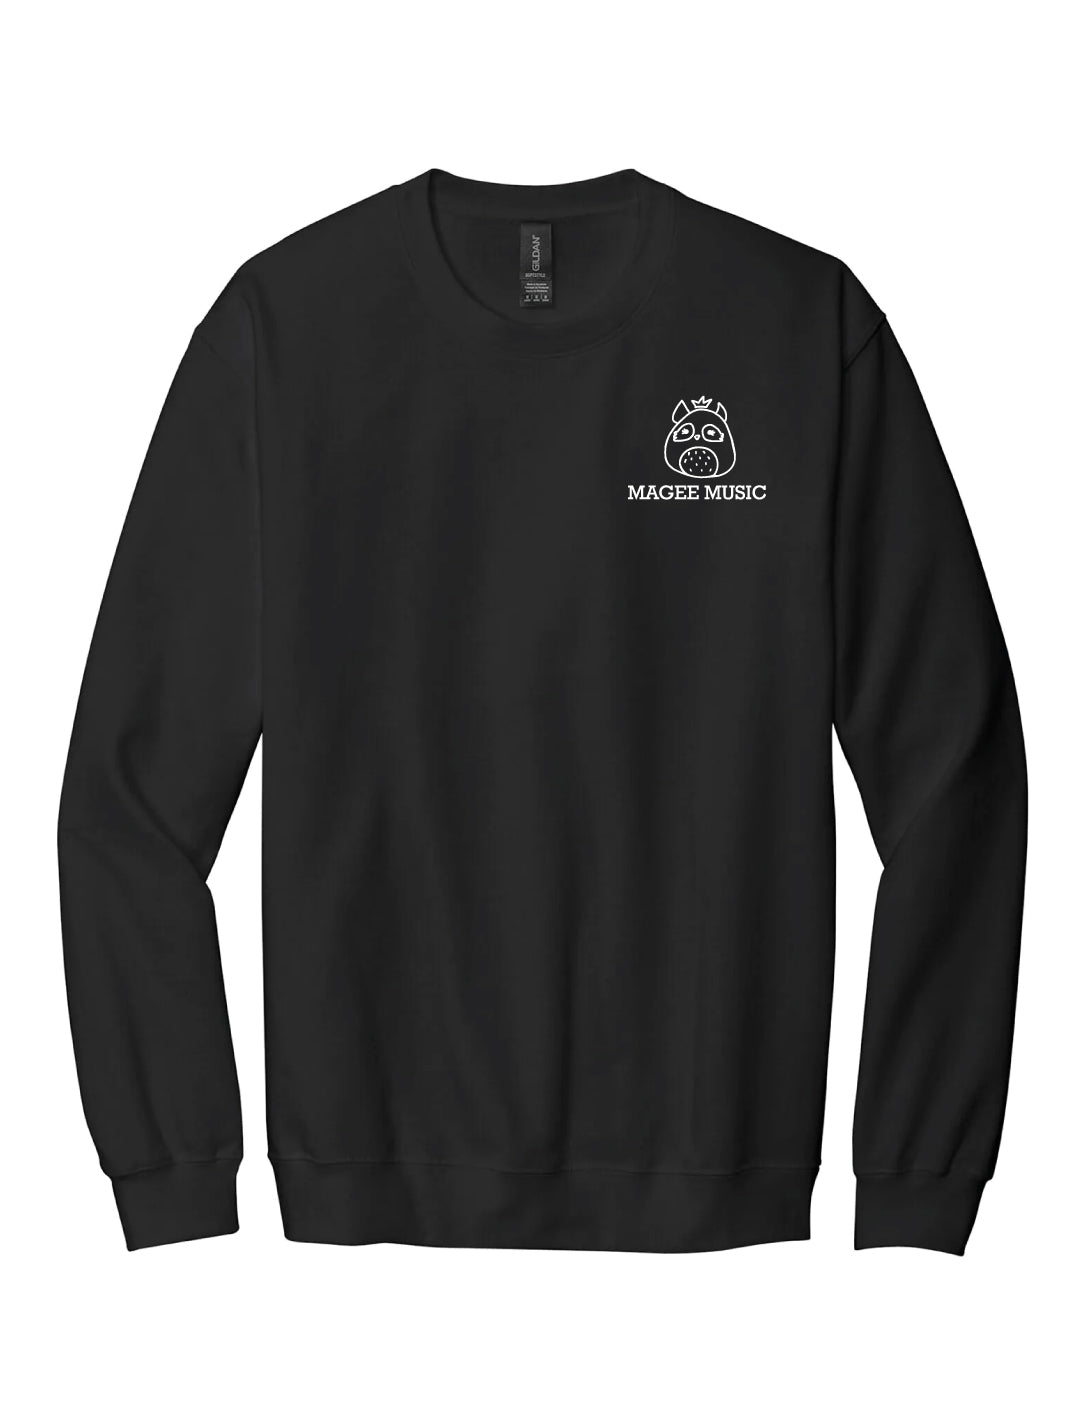 Magee Music Crewneck (Front and Back Designs) - Oddball Workshop